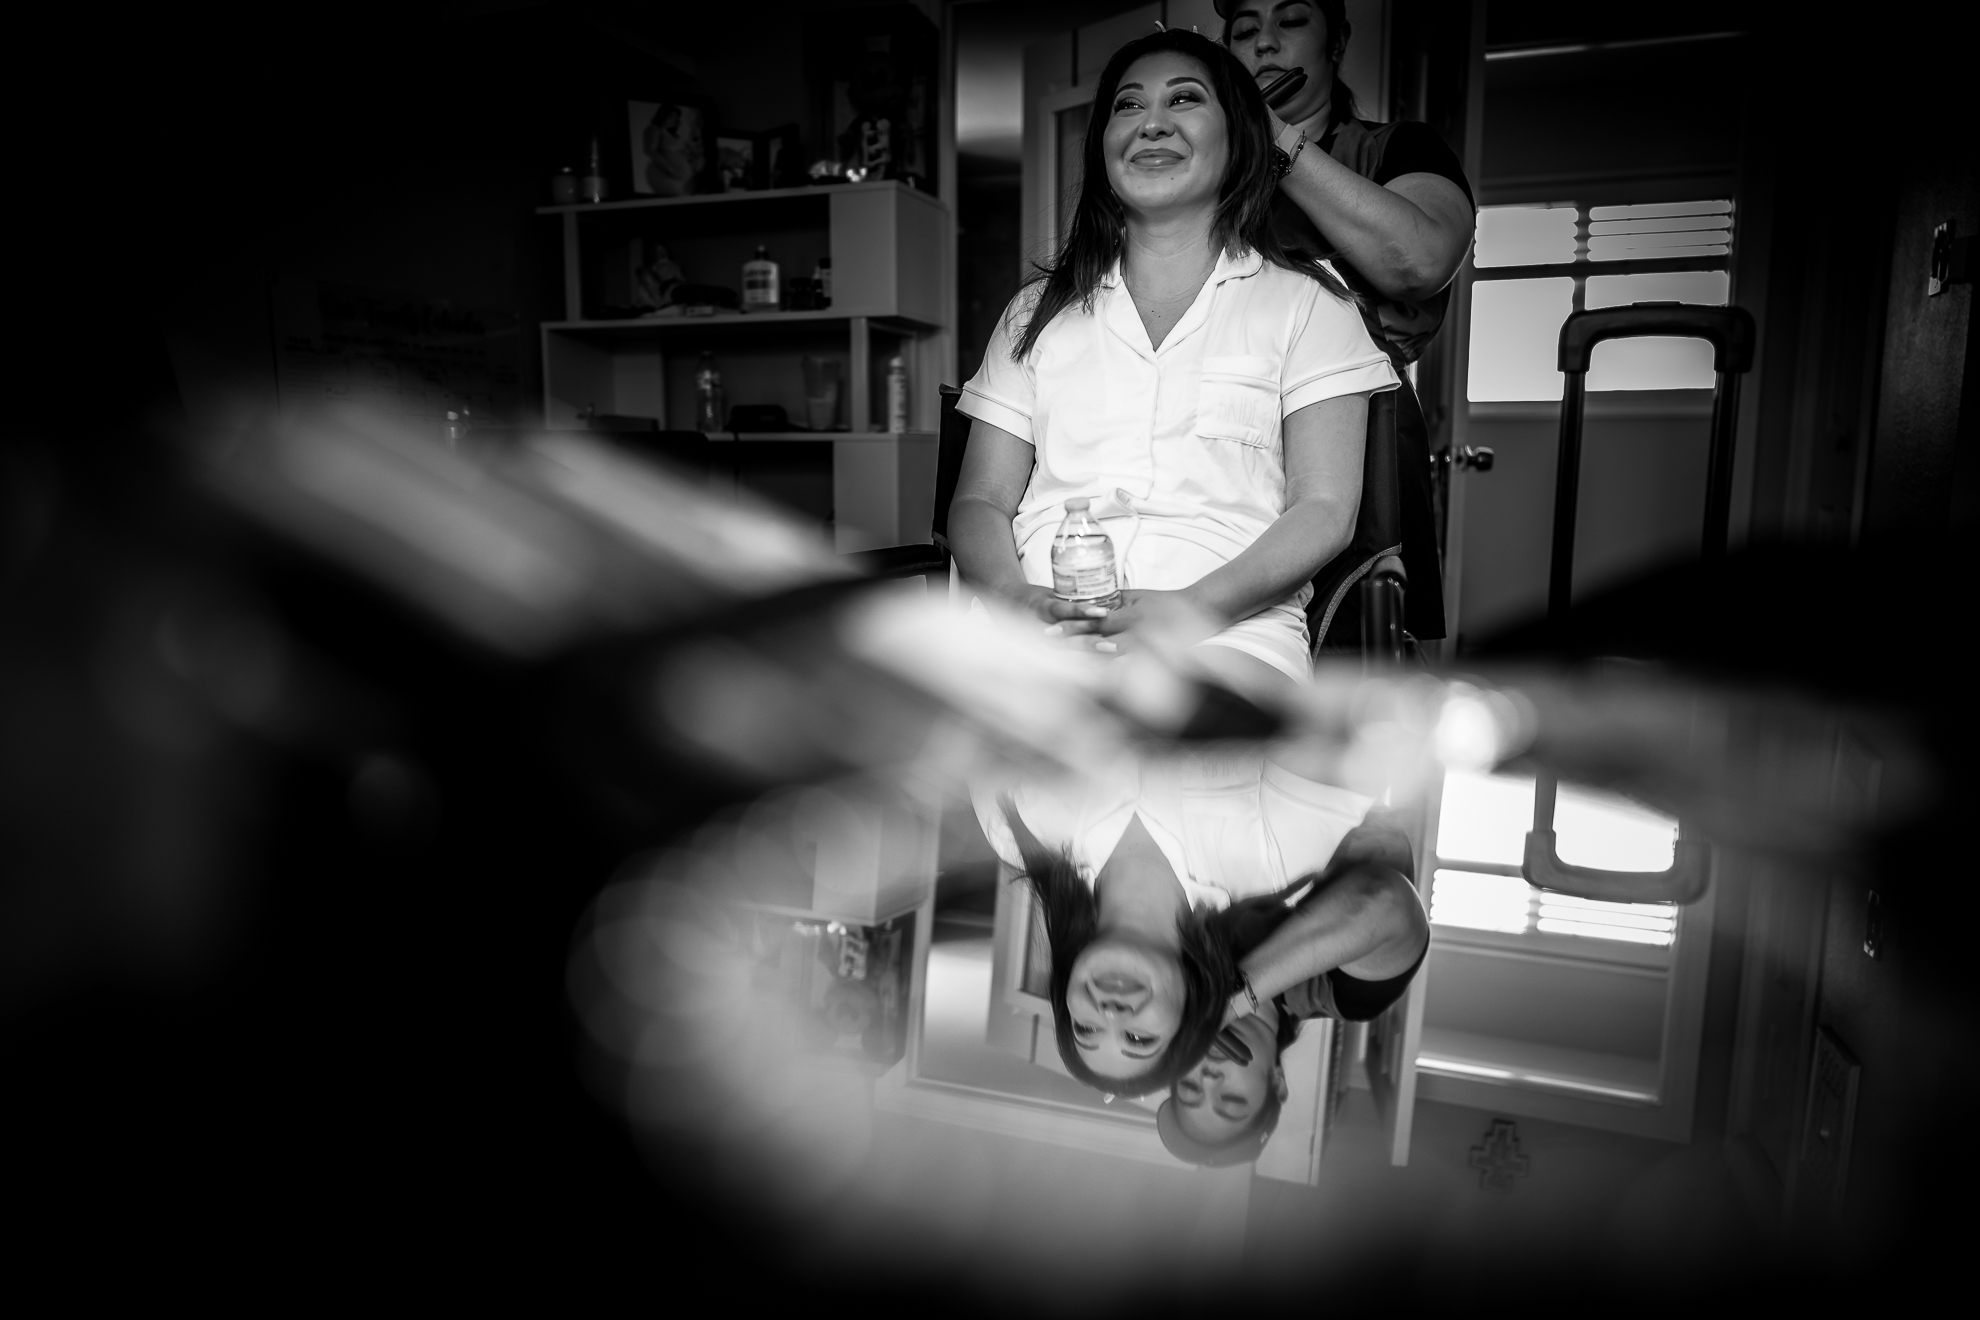 ThomasKim_photography A woman is getting her hair done in front of a mirror at a salon.